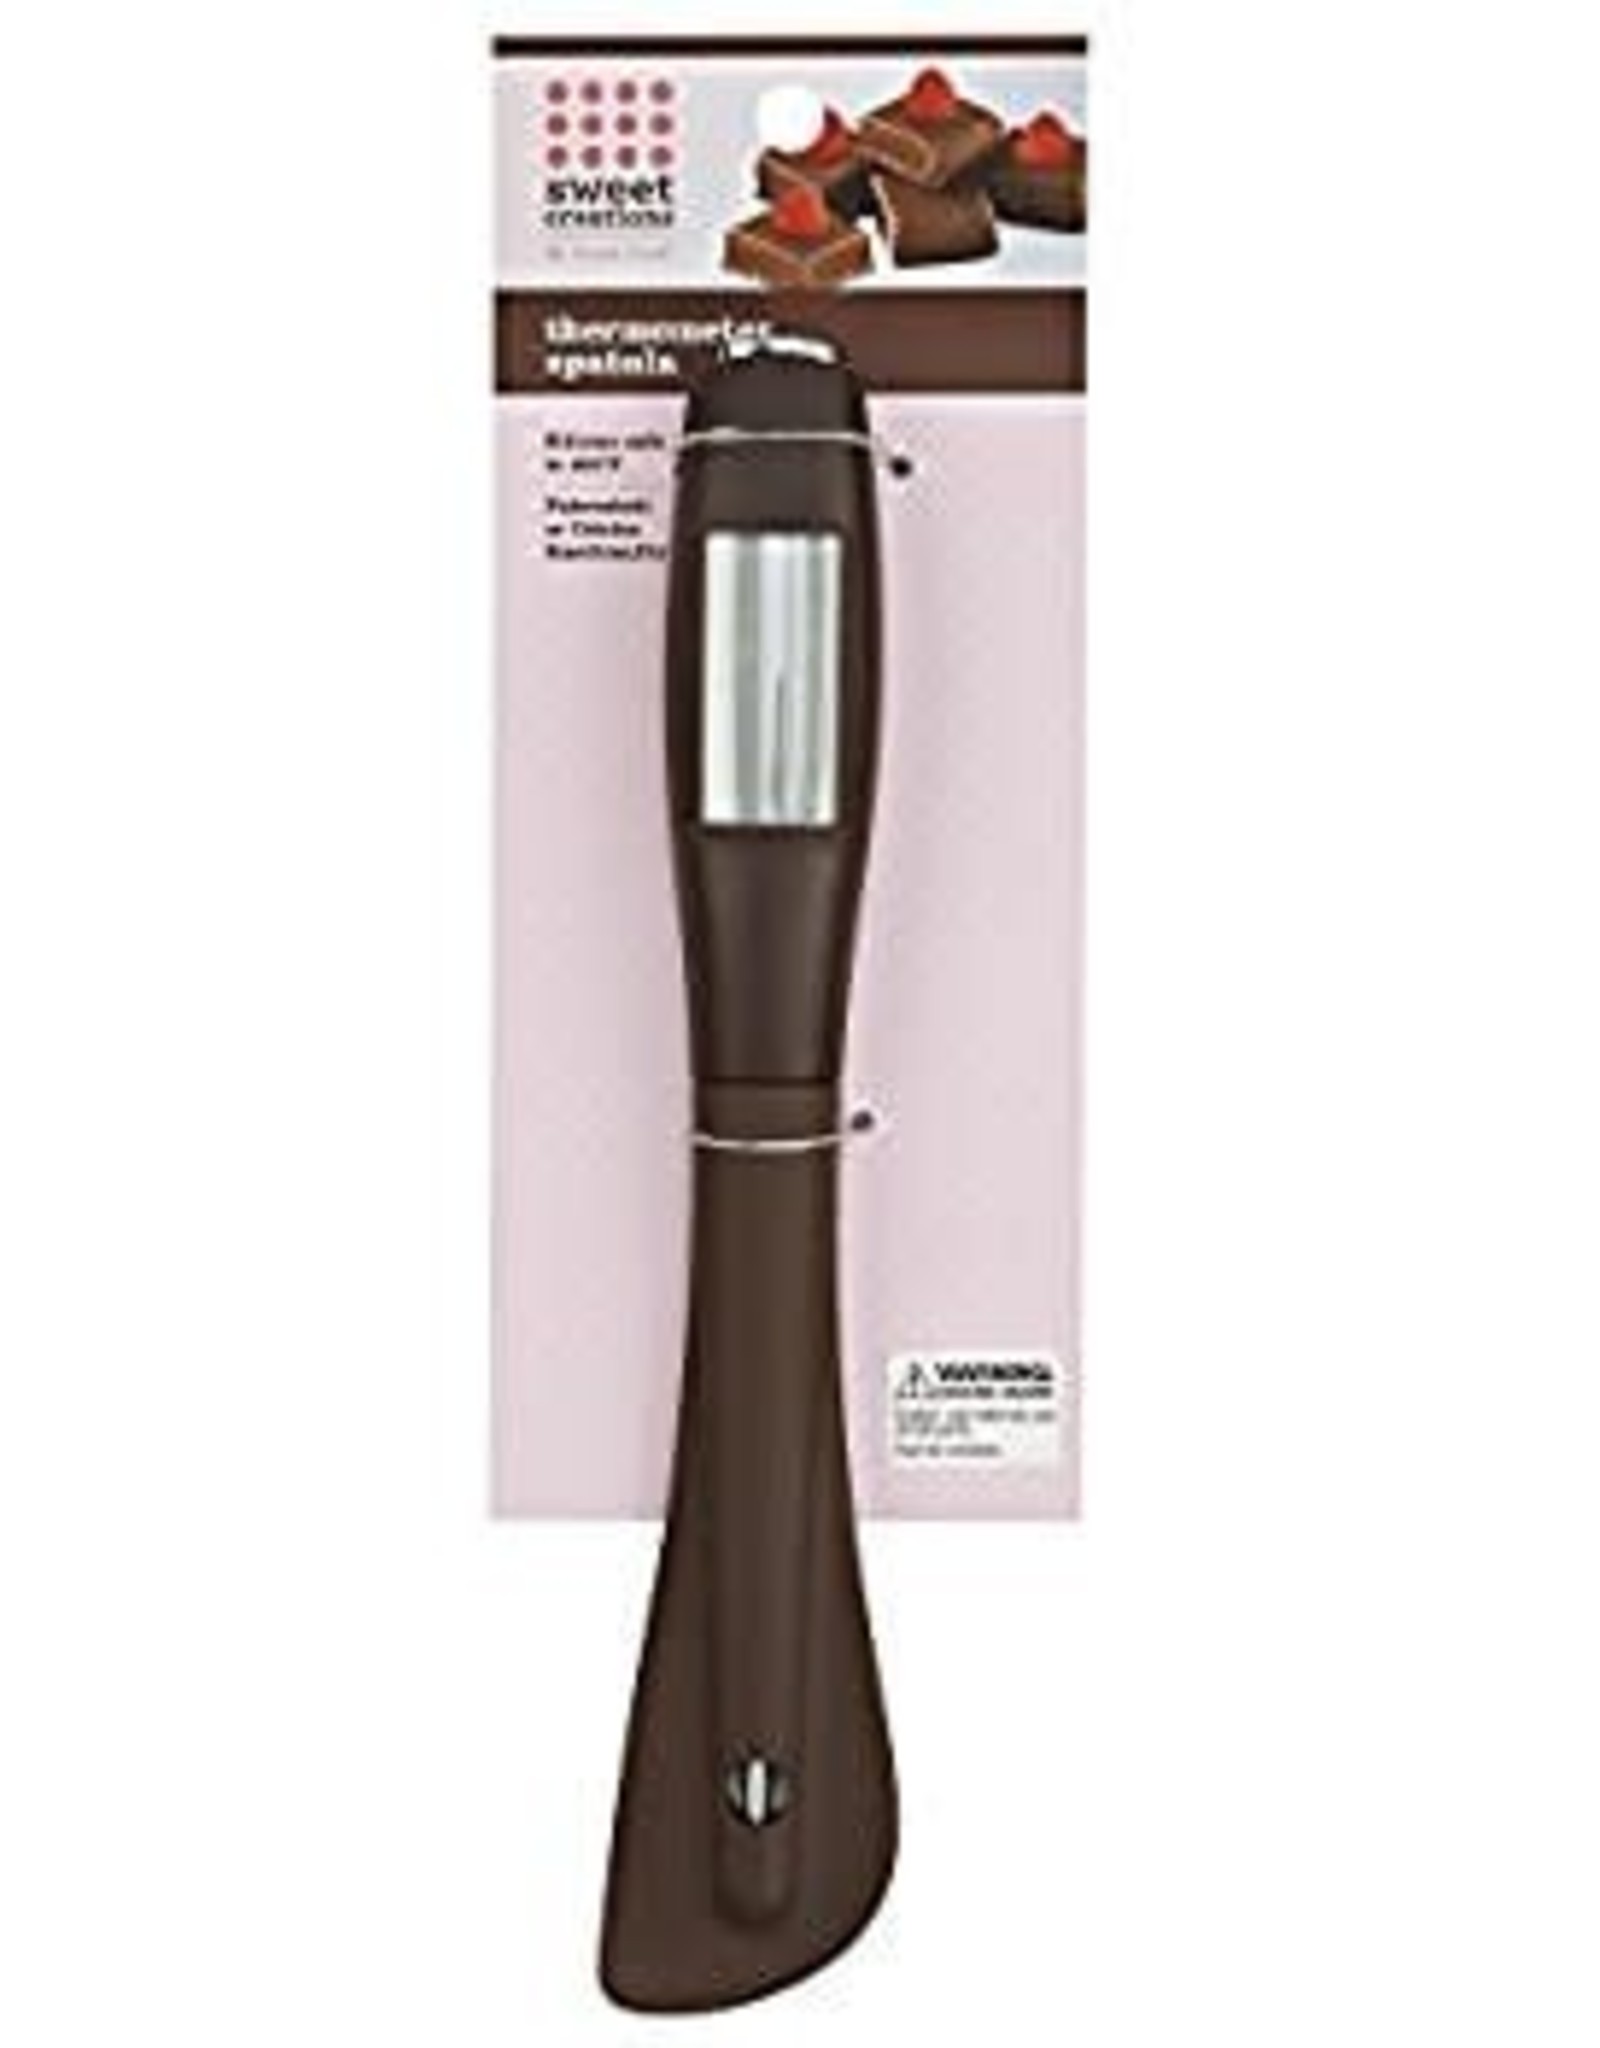 Sweet Creations Thermometer Spatula